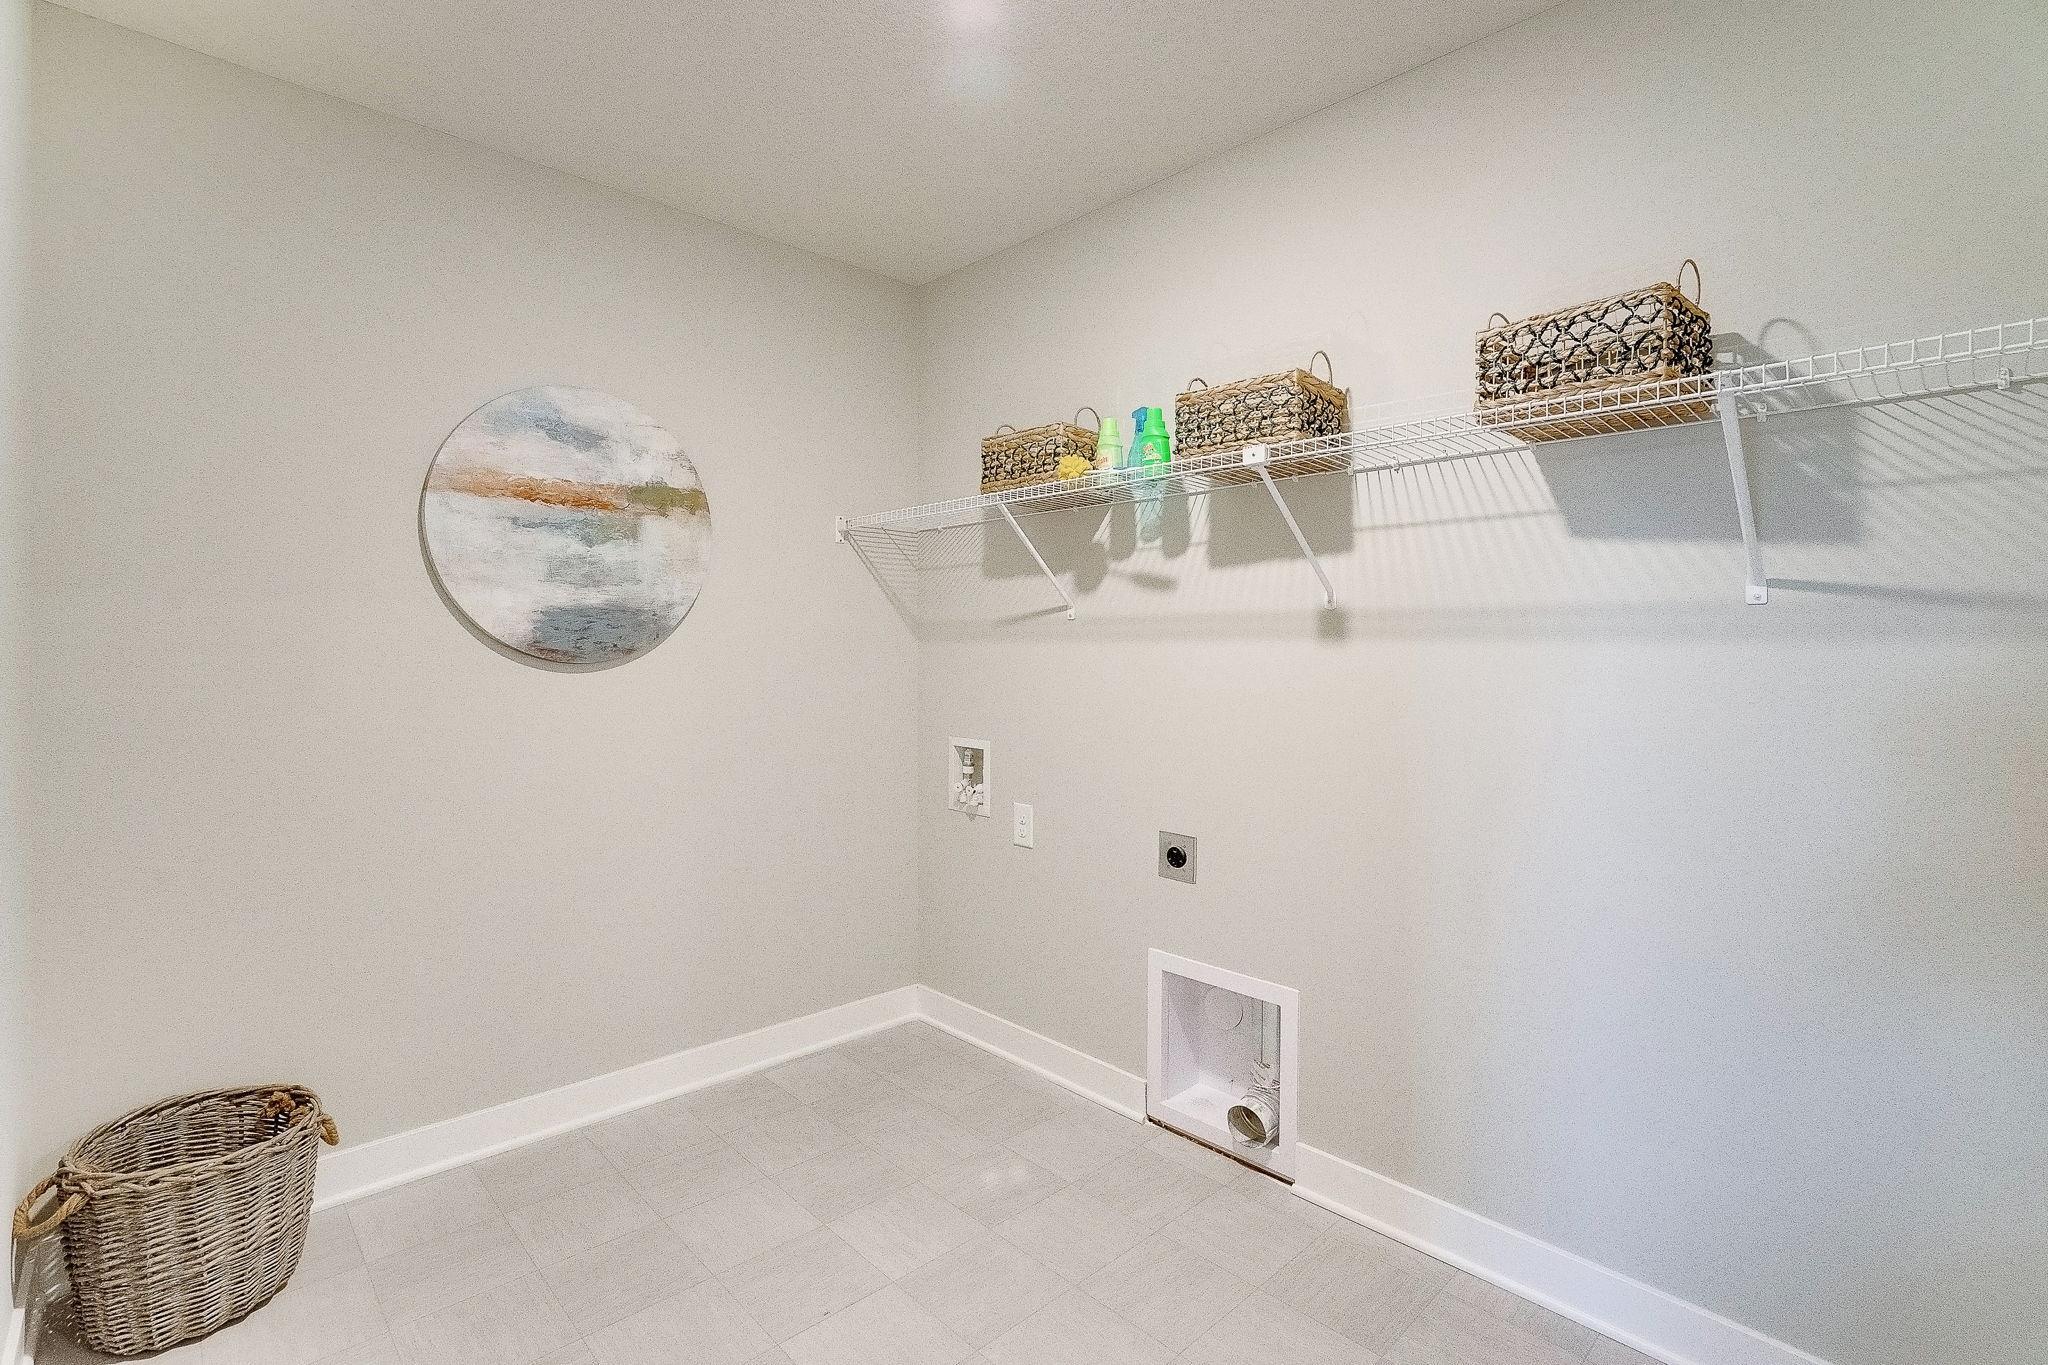 Upstairs laundry ROOM! Space to sort, fold and store! (Model home, colors will vary)